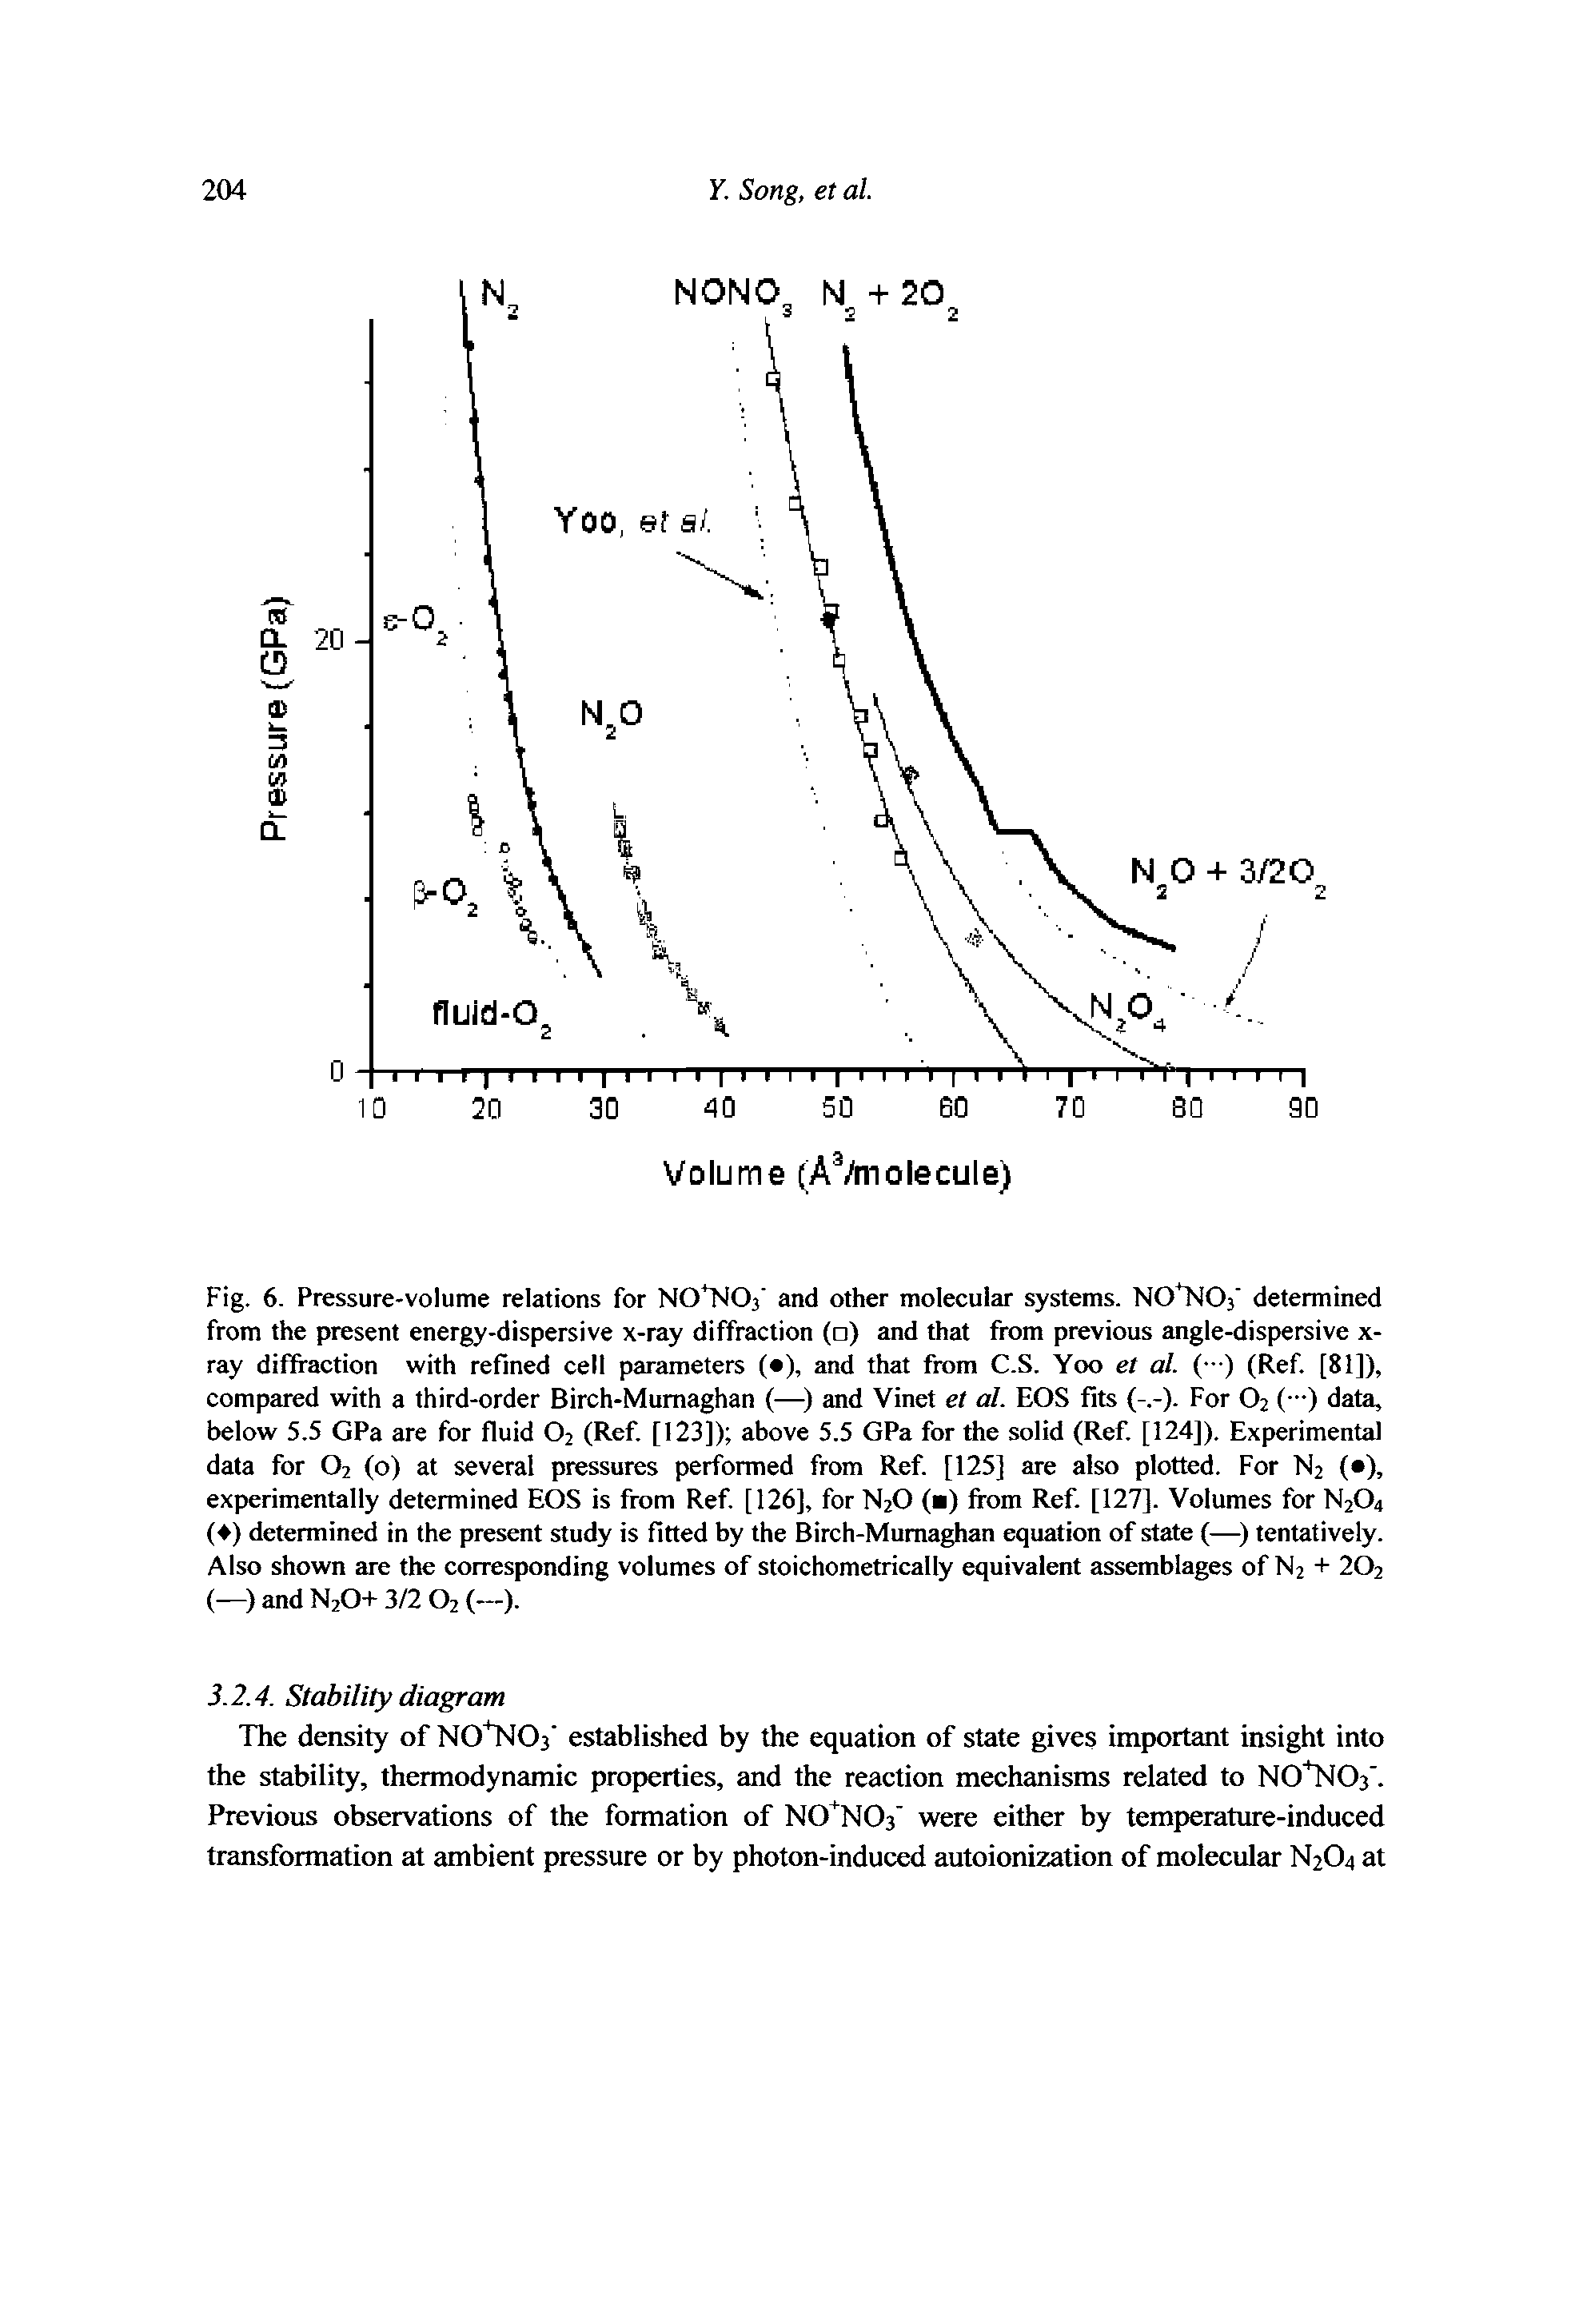 Fig. 6. Pressure-volume relations for NO NOs and other molecular systems. NO NOs determined from the present energy-dispersive x-ray diffraction ( ) and that from previous angle-dispersive x-ray diffraction with refined cell parameters ( ), and that from C.S. Yoo et al. ( ) (Ref. [81]), compared with a third-order Birch-Mumaghan (—) and Vinet et al. EOS fits For O2 ( ) data, below 5.5 GPa are for fluid O2 (Ref. [123]) above 5.5 GPa for the solid (Ref. [124]). Experimental data for O2 (o) at several pressures performed from Ref. [125] are also plotted. For N2 ( ), experimentally determined EOS is from Ref [126], for N2O ( ) from Ref. [127]. Volumes for N2O4 ( ) determined in the present study is fitted by the Birch-Mumaghan equation of state (—) tentatively. Also shown are the corresponding volumes of stoichometrically equivalent assemblages of N2 + 2O2 (—) and N2O+ 3/2 O2 (—).